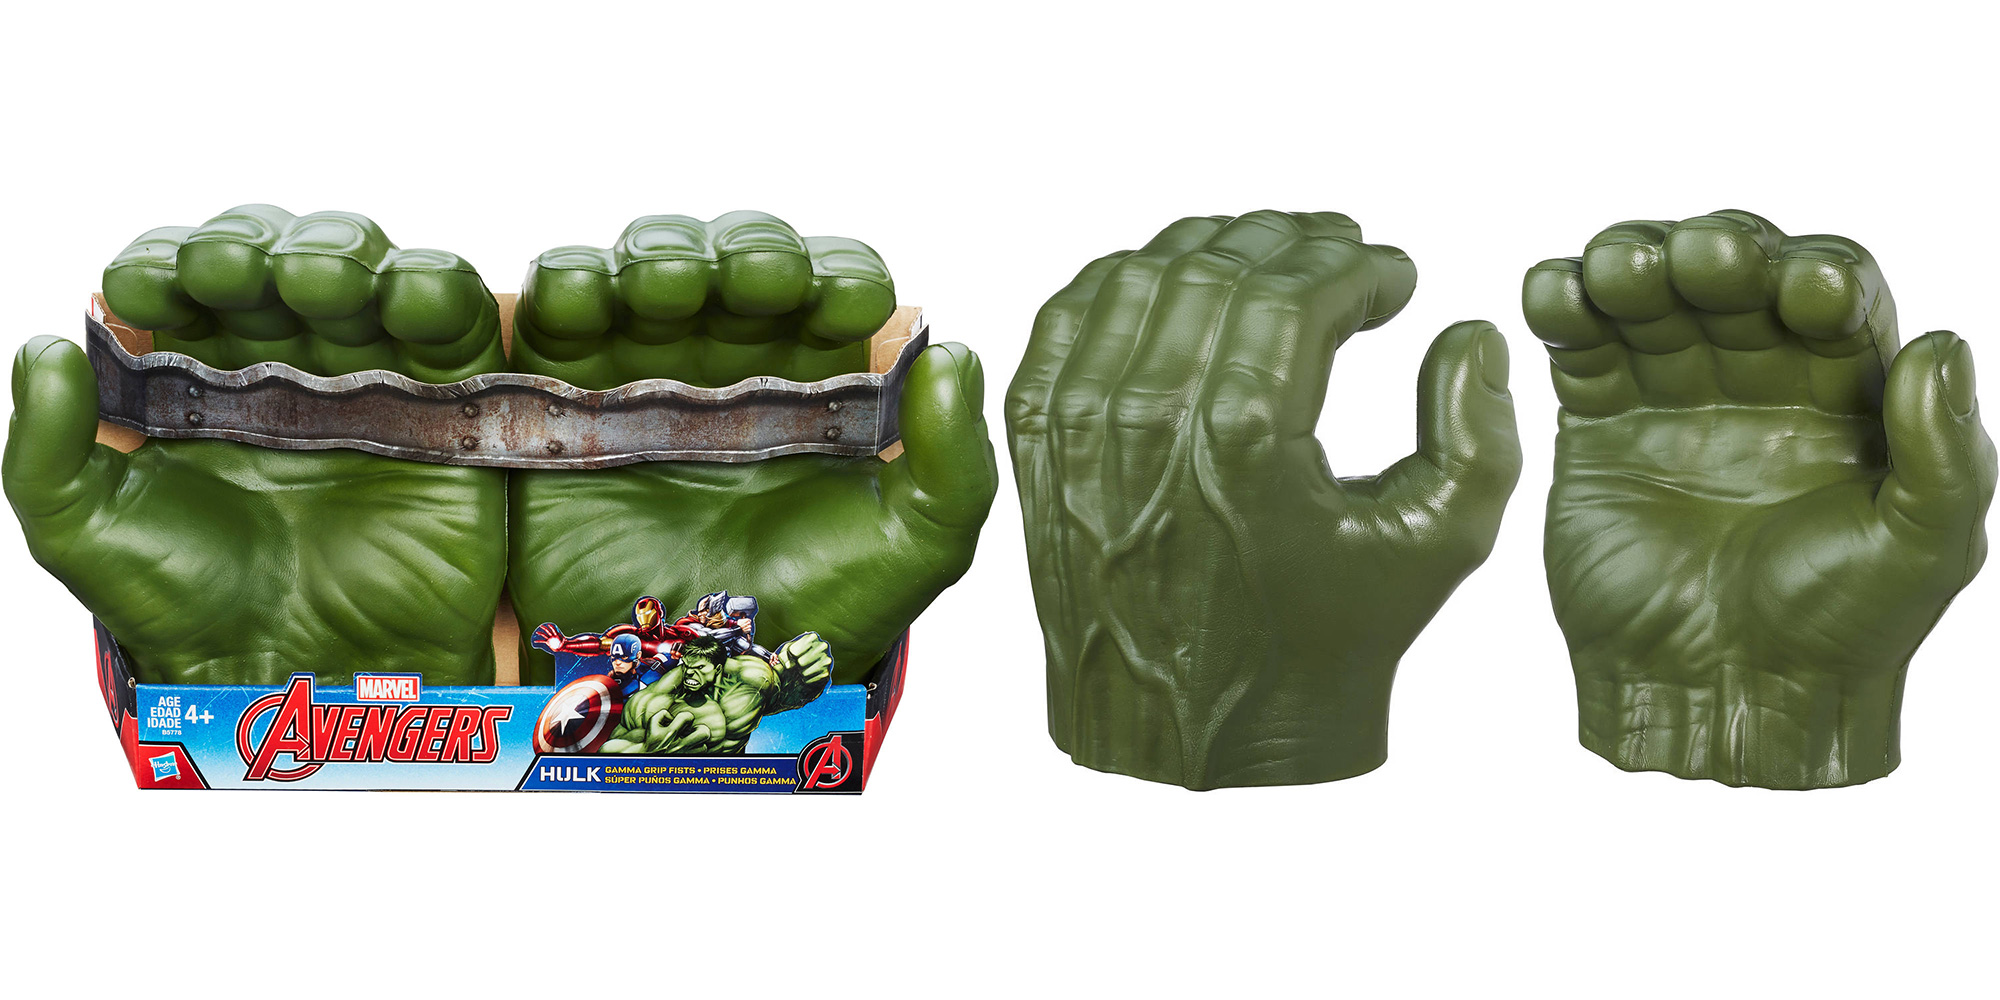 https://9to5toys.com/wp-content/uploads/sites/5/2017/11/hulk-fists.jpg